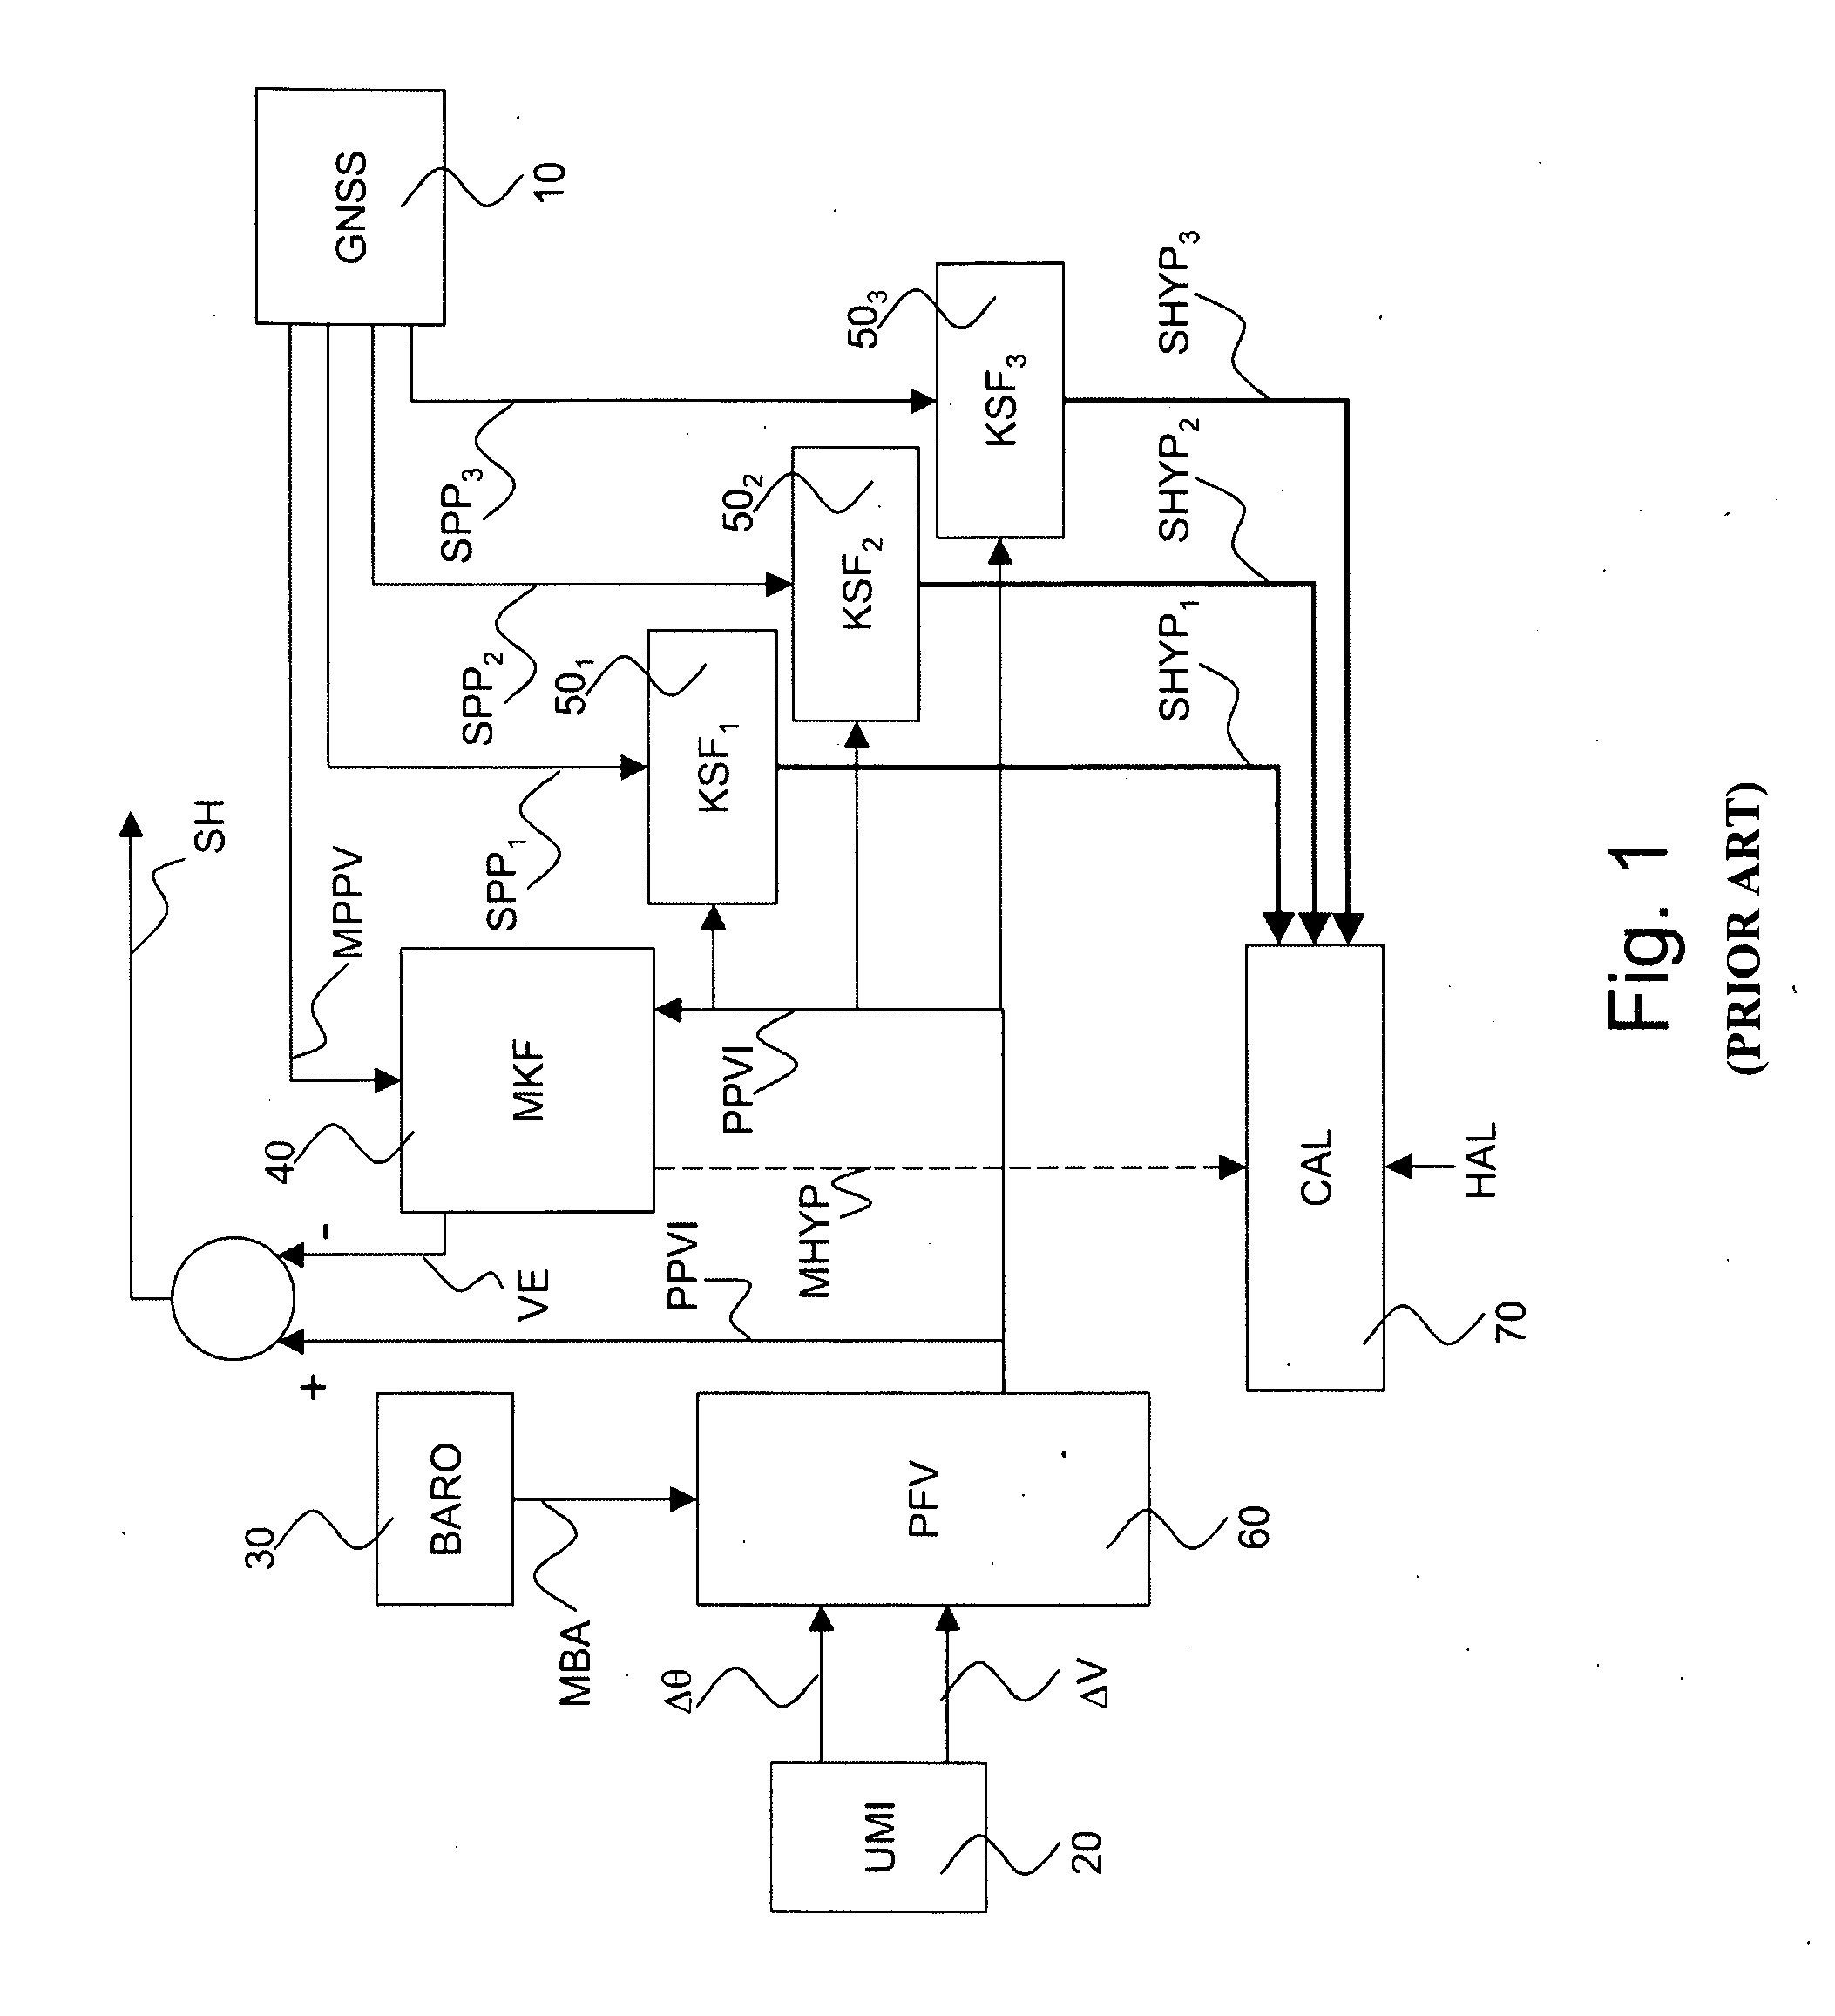 Hybrid ins/gnss system with integrity monitoring and method for integrity monitoring